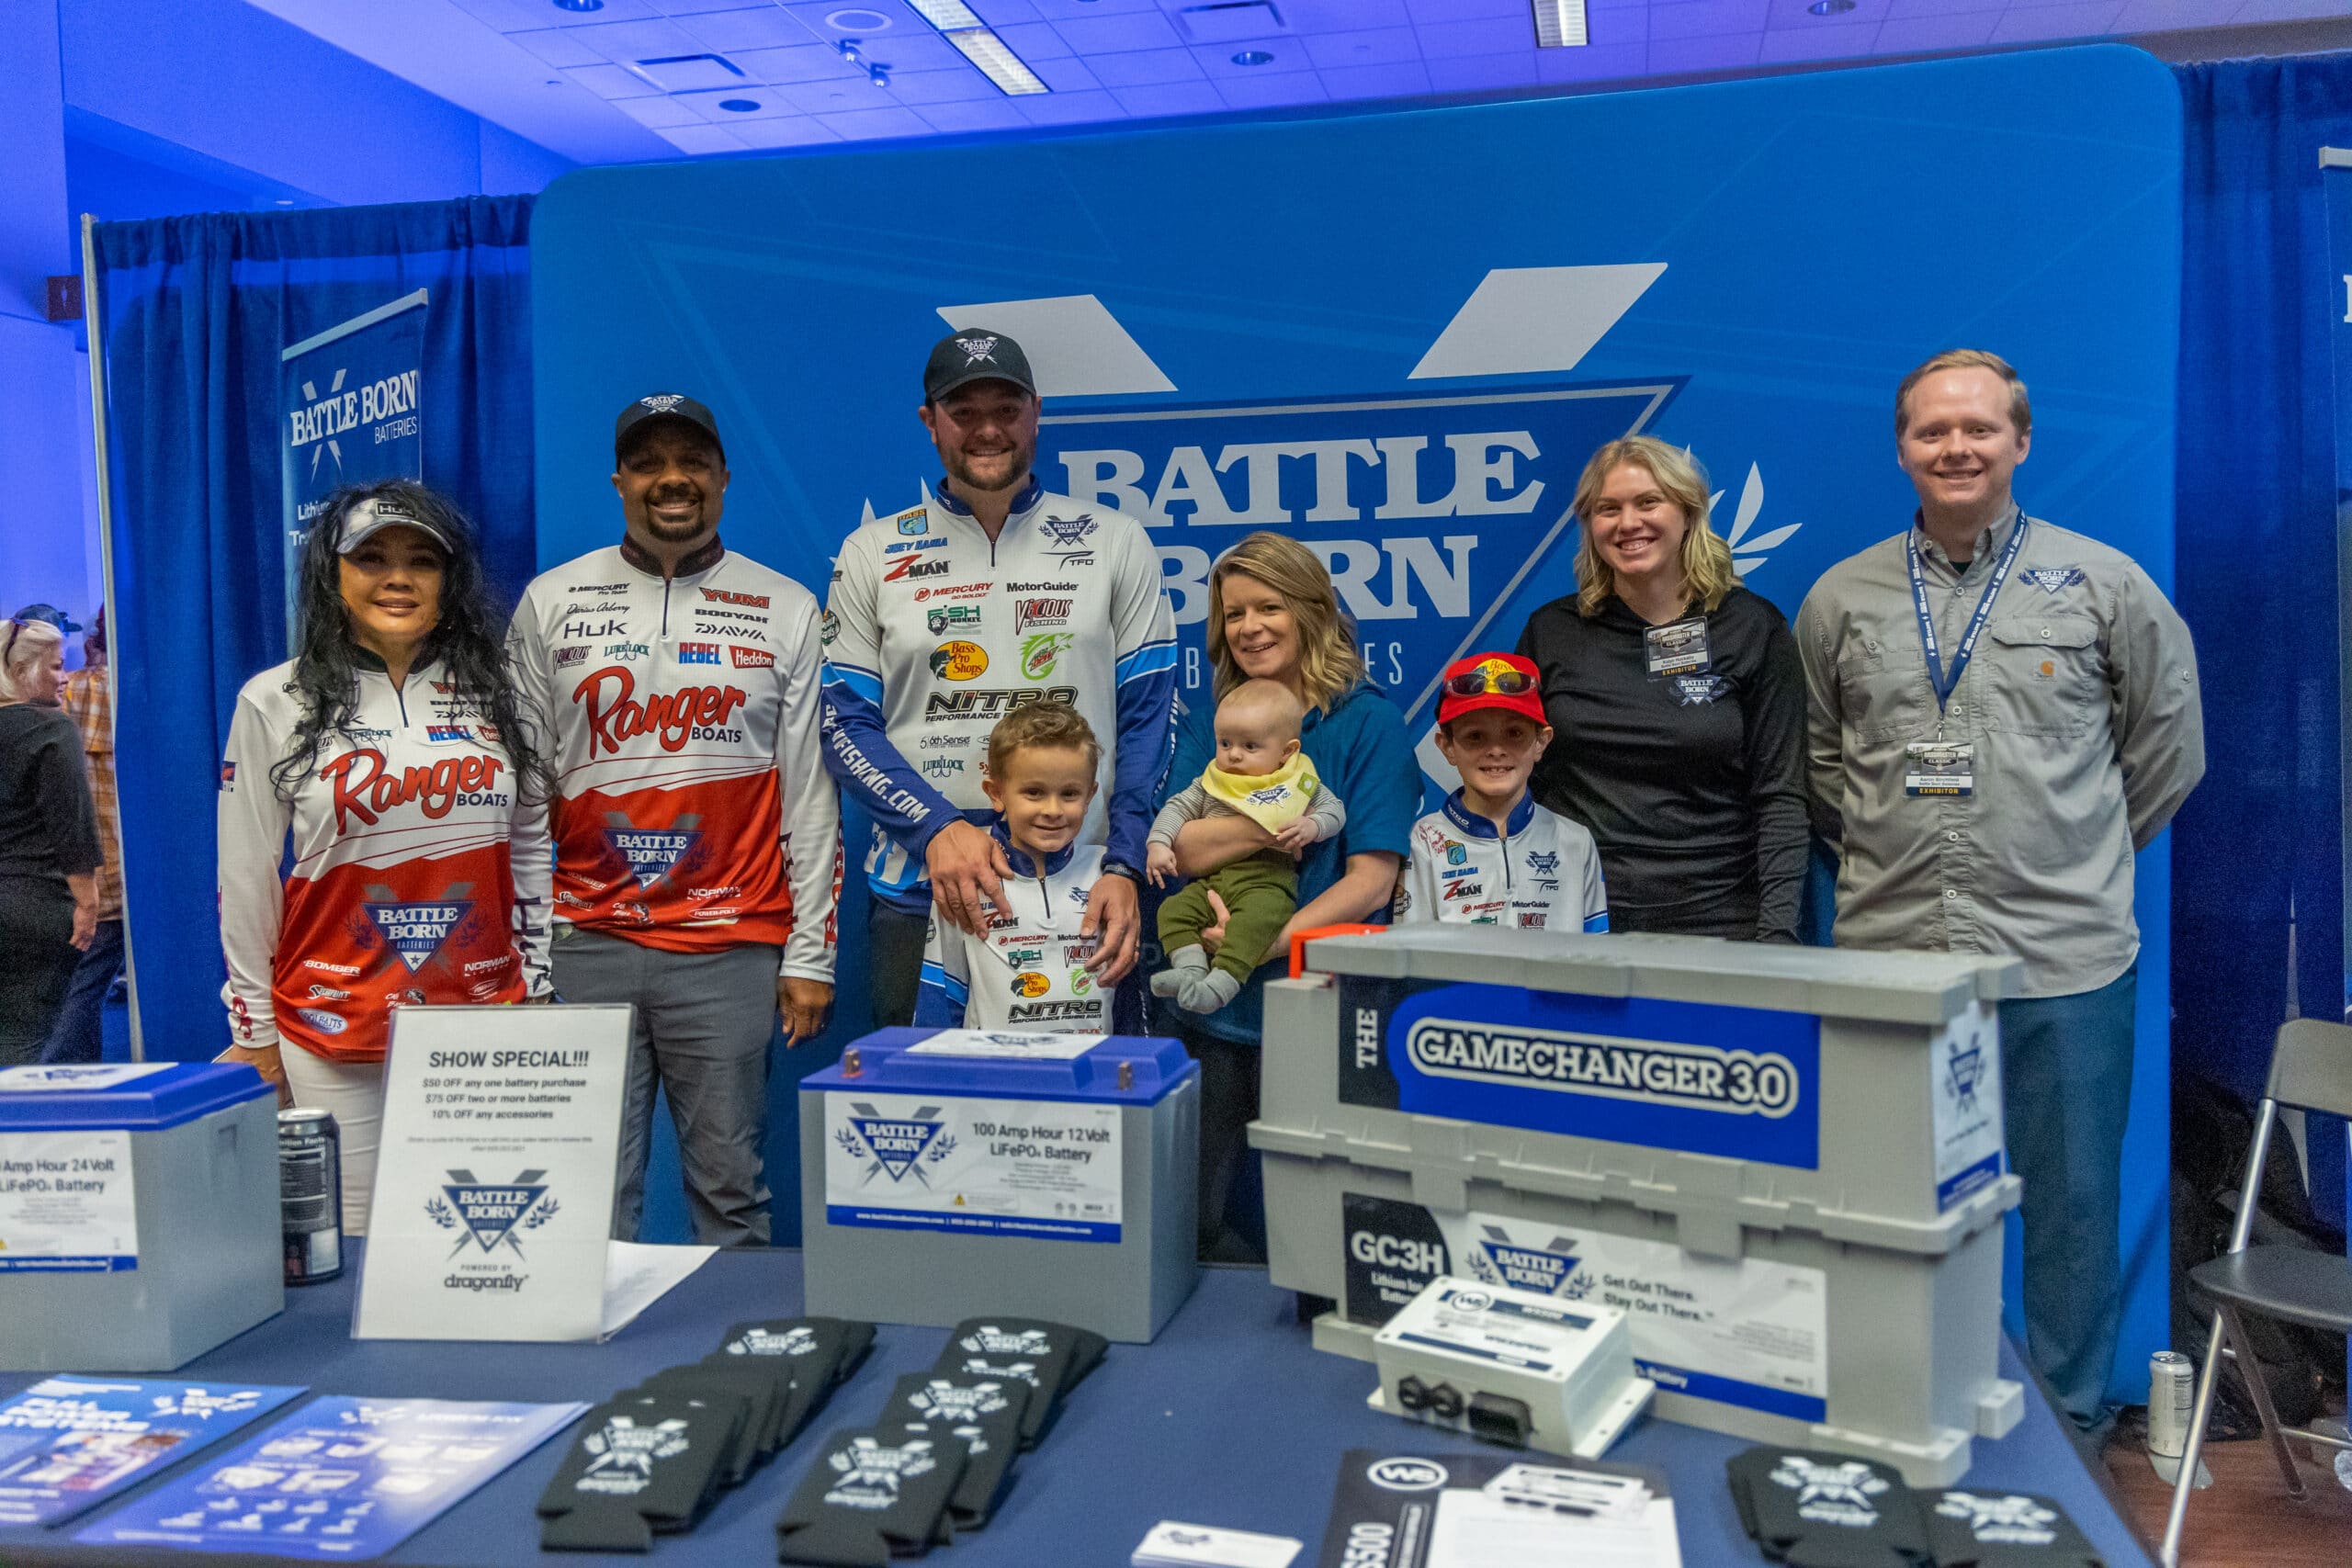 Professional Anglers Joey Nania and Darius Arberry at the Bassmaster Classic